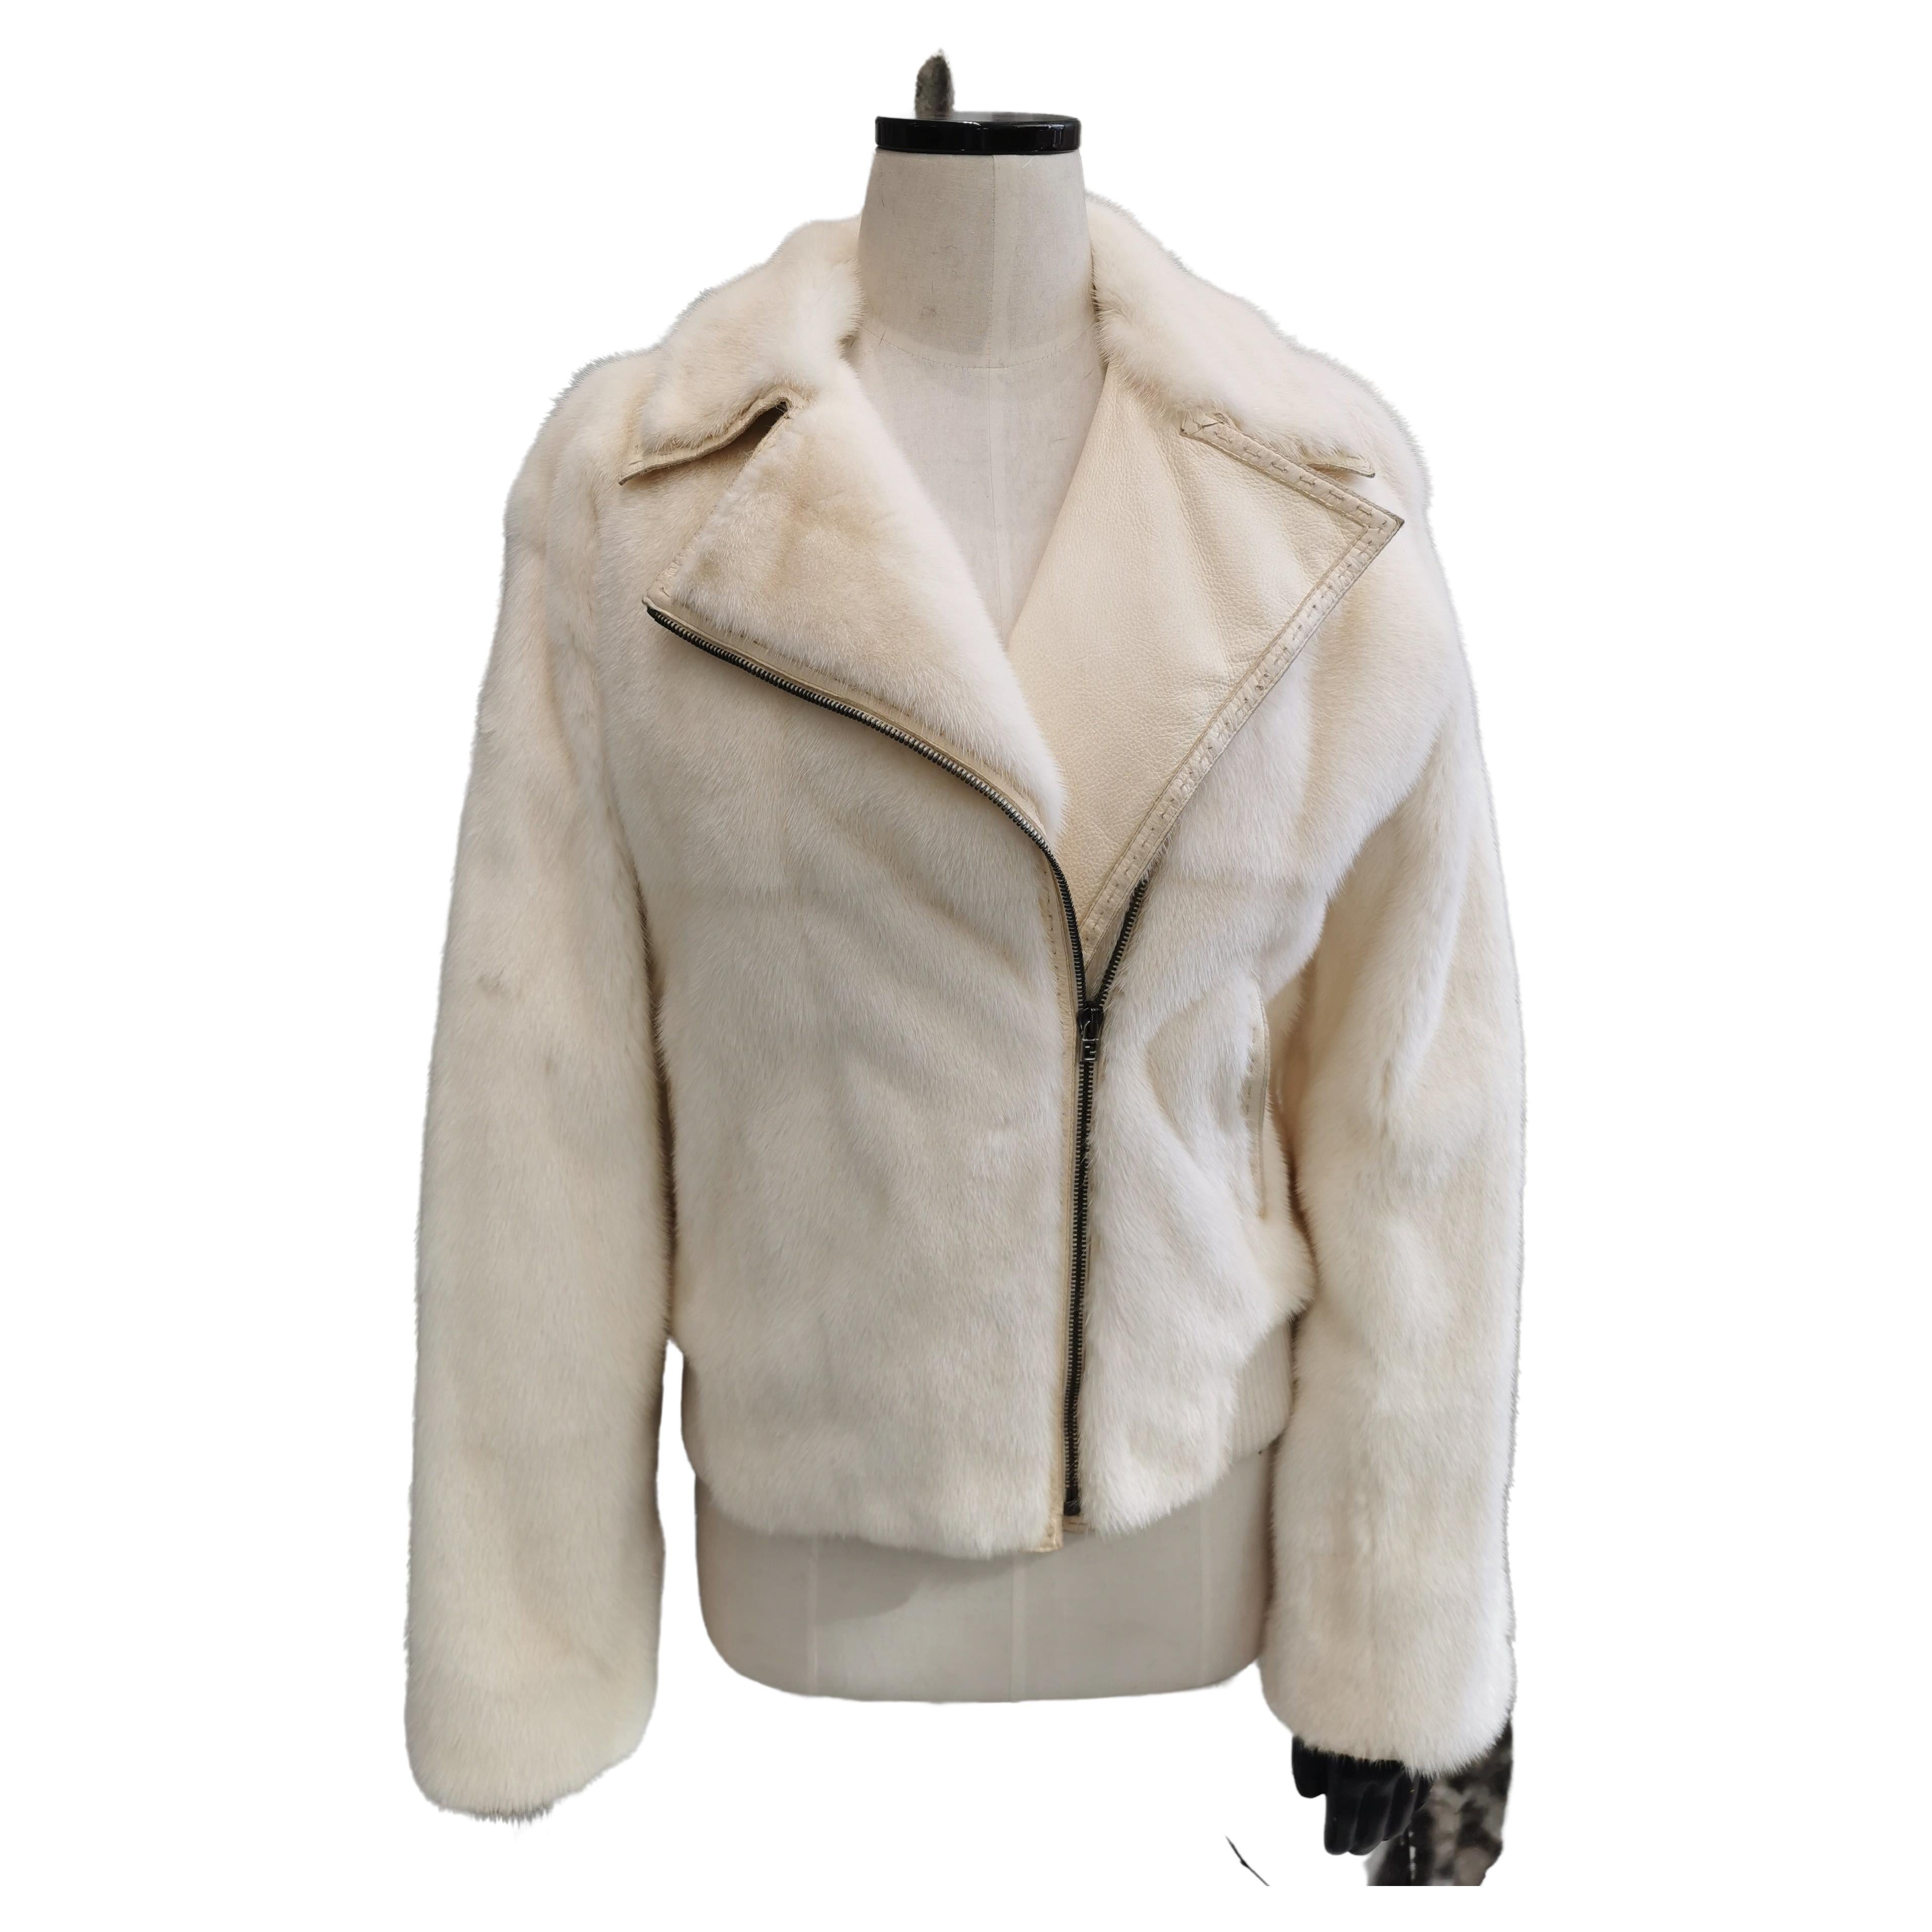 Fendi Cream Mink Fur Coat (Size 12 - L) 

When it comes to fur, Fendi is the ultimate reference in quality and style. This stunning Fendi coat is a classic with the perfecto design and leather stitching workmanship. It has a classic notch collar